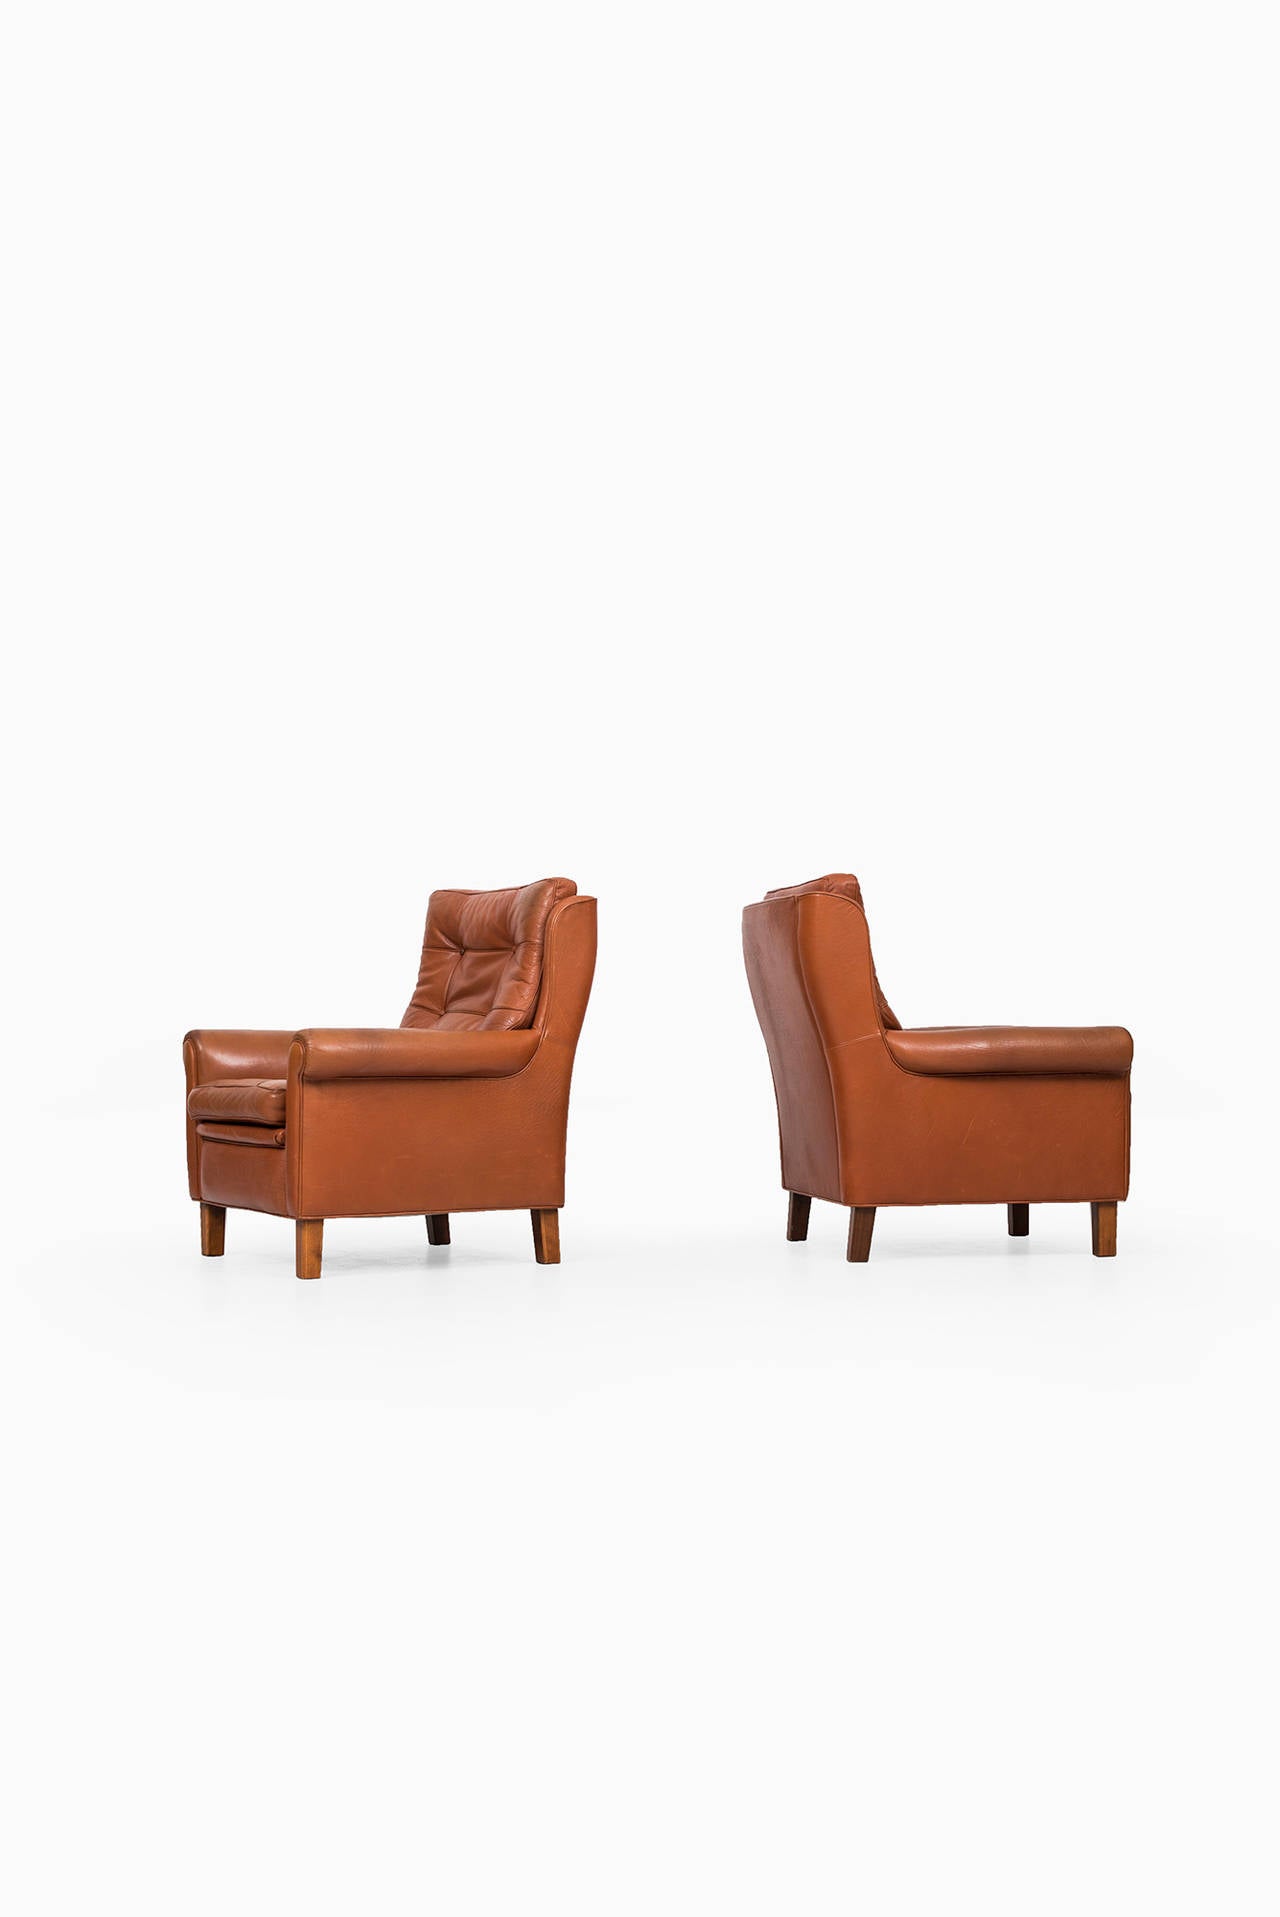 A pair of easy chairs in brown buffalo leather designed by Arne Norell. Produced by Arne Norell AB in Aneby, Sweden.